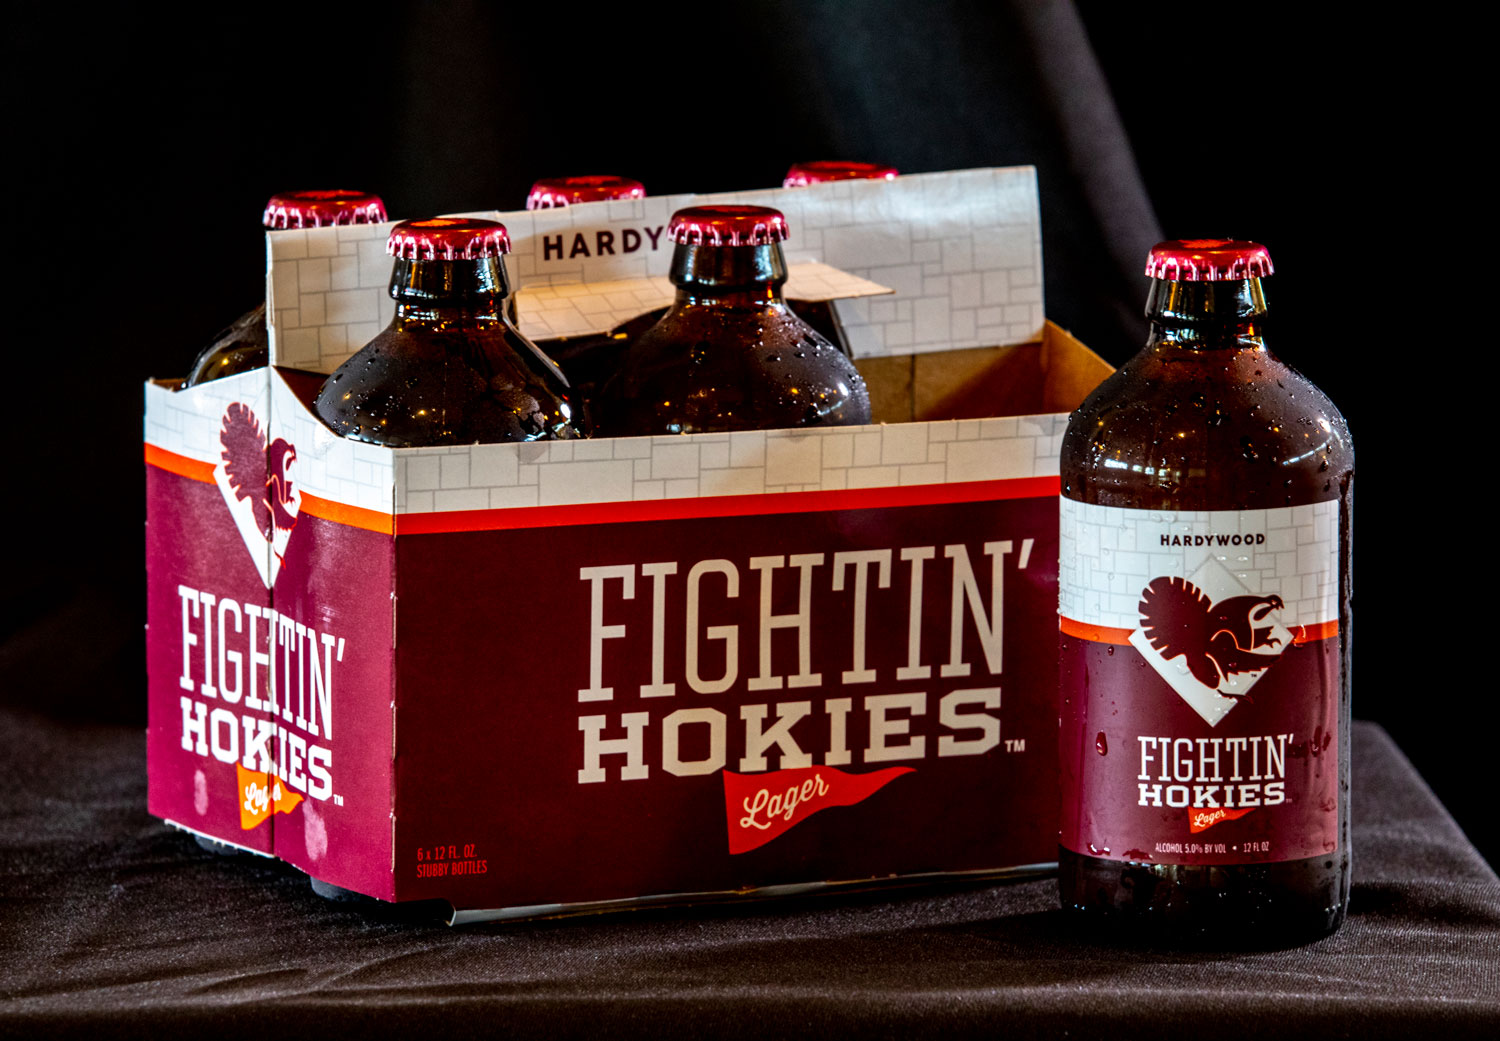 Fightin’ Hokies Lager is available for purchase across the state of Virginia. Photo: Zeke Barlow, Virginia Tech